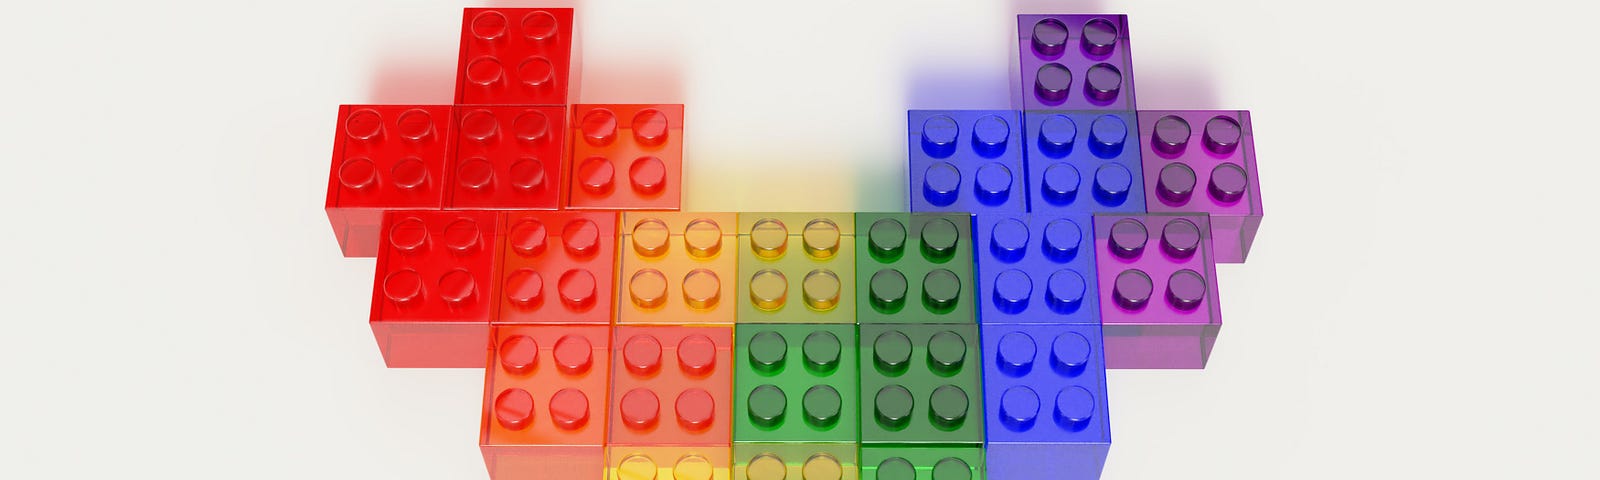 Image of a heart shape made out of LEGO blocks in rainbow colors.